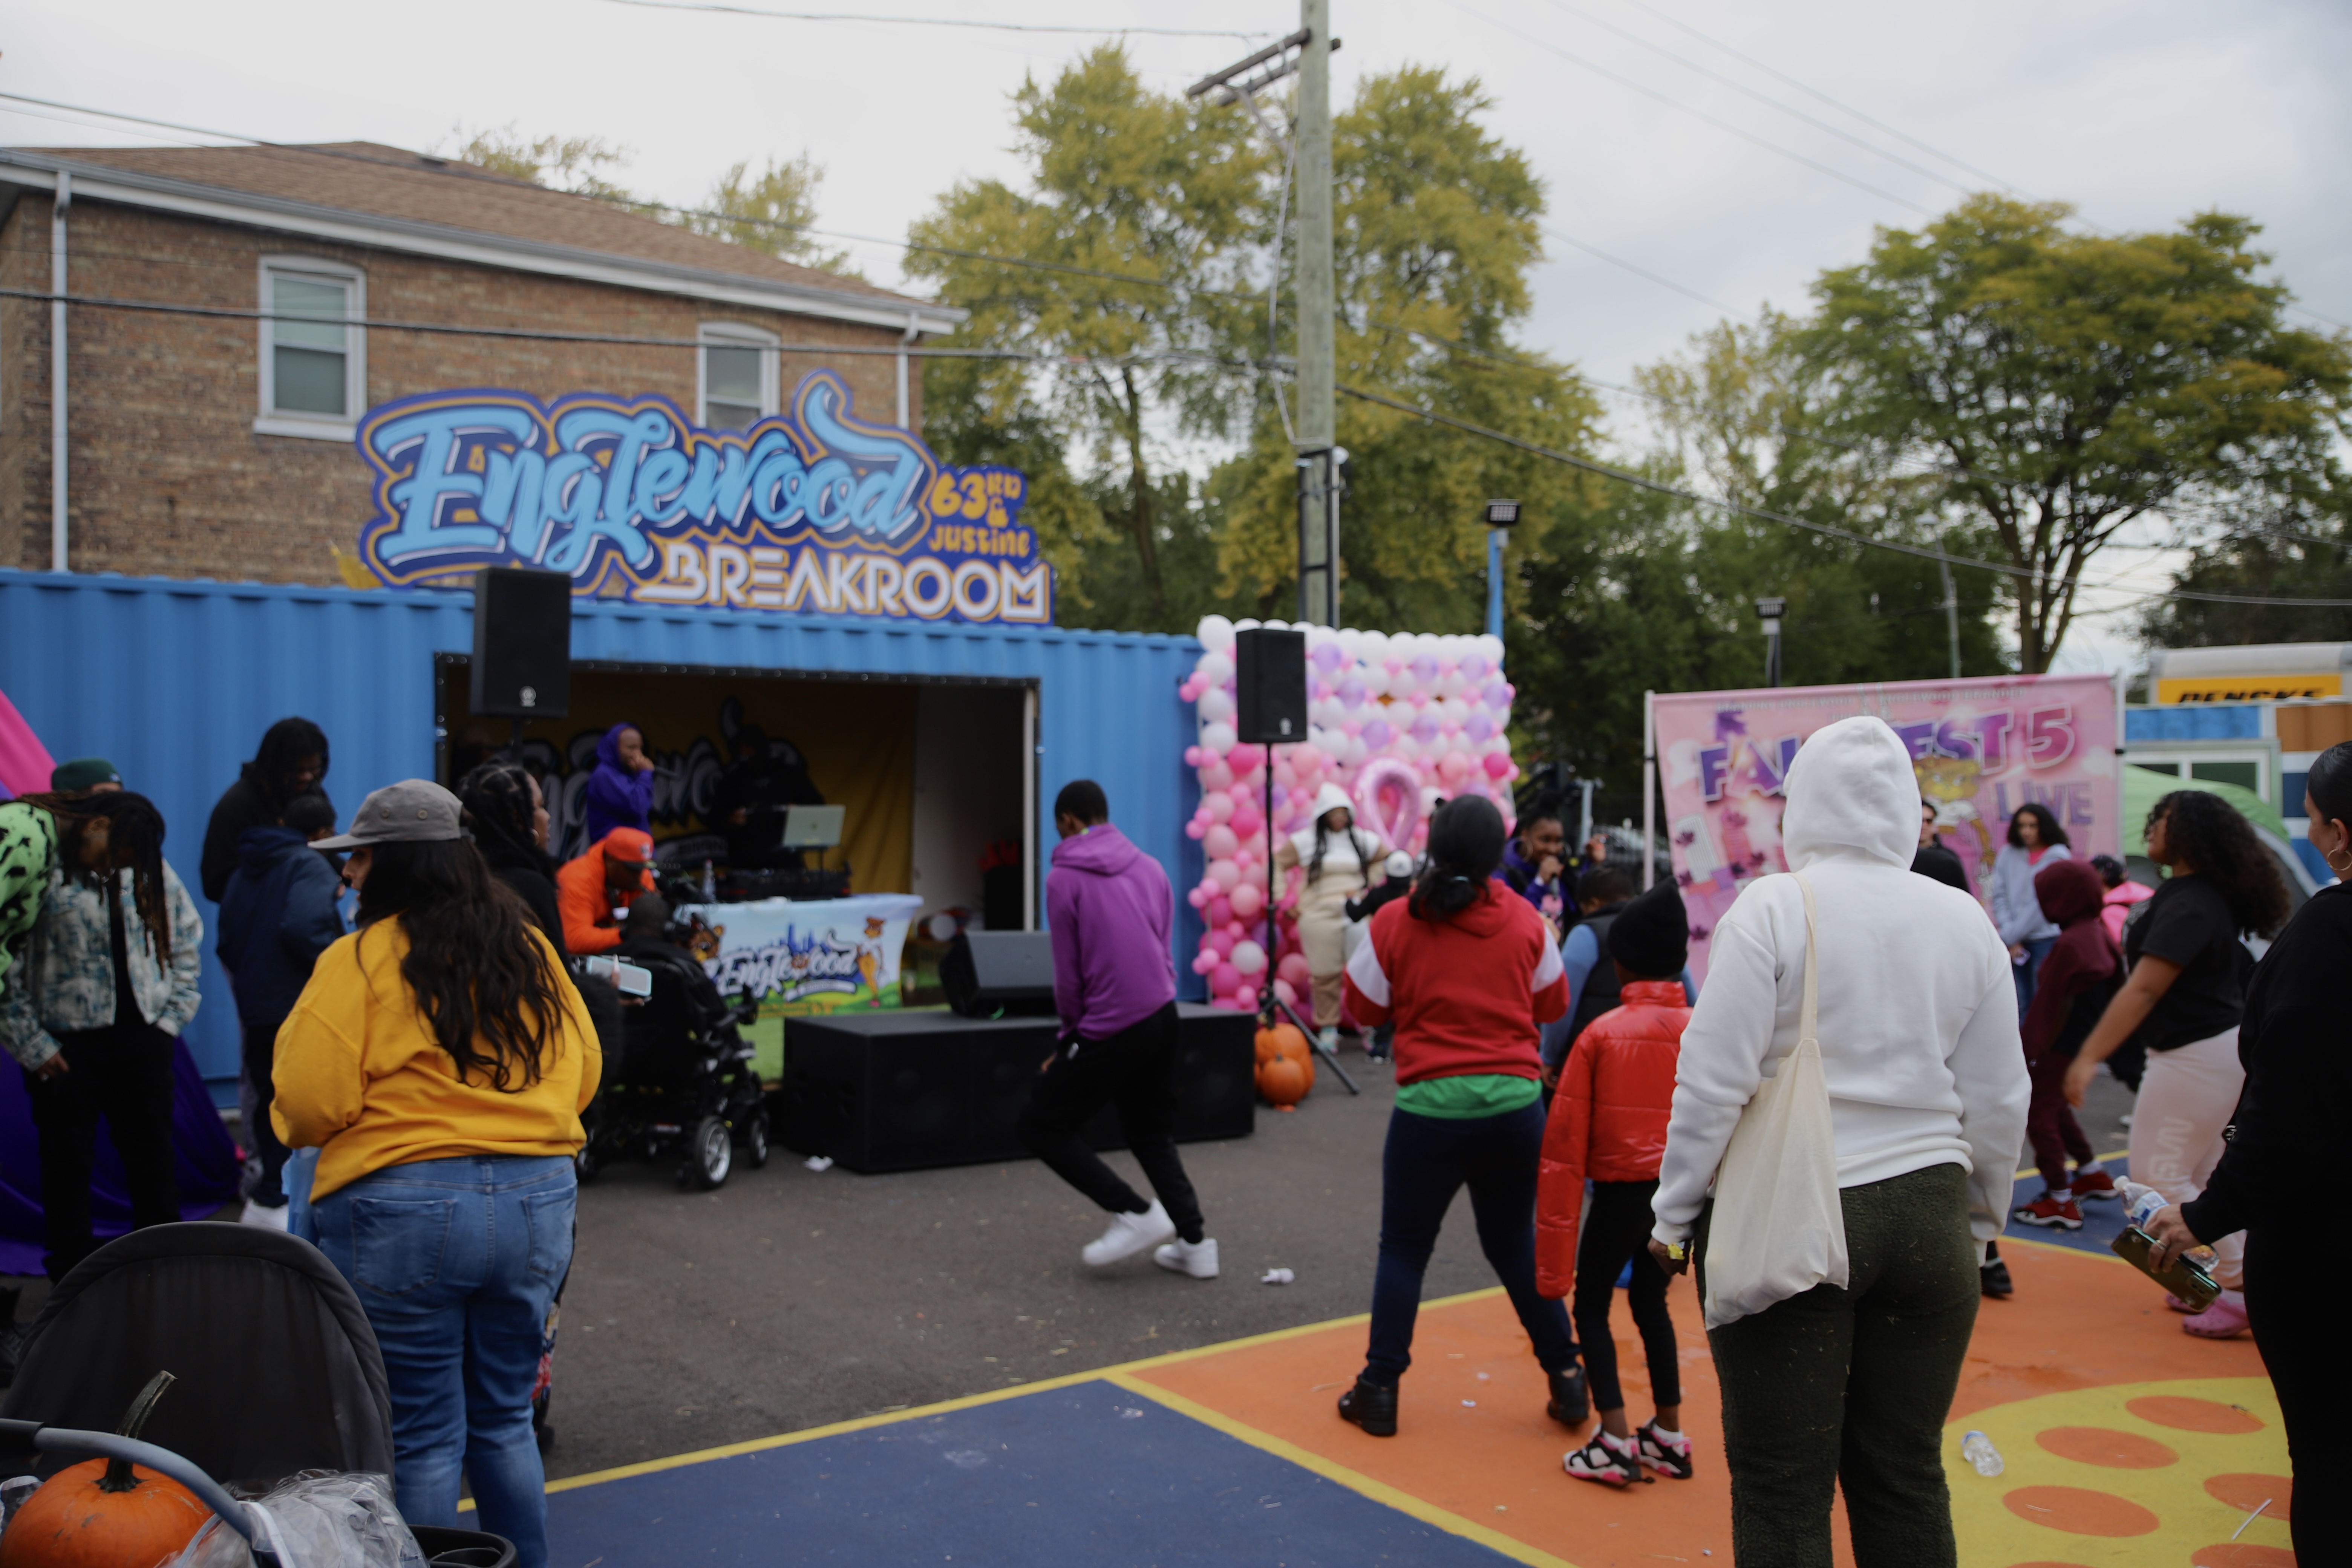 Attendees dancing at the annual Englewood Breakroom Fall Festival | photo by Jana Simovic